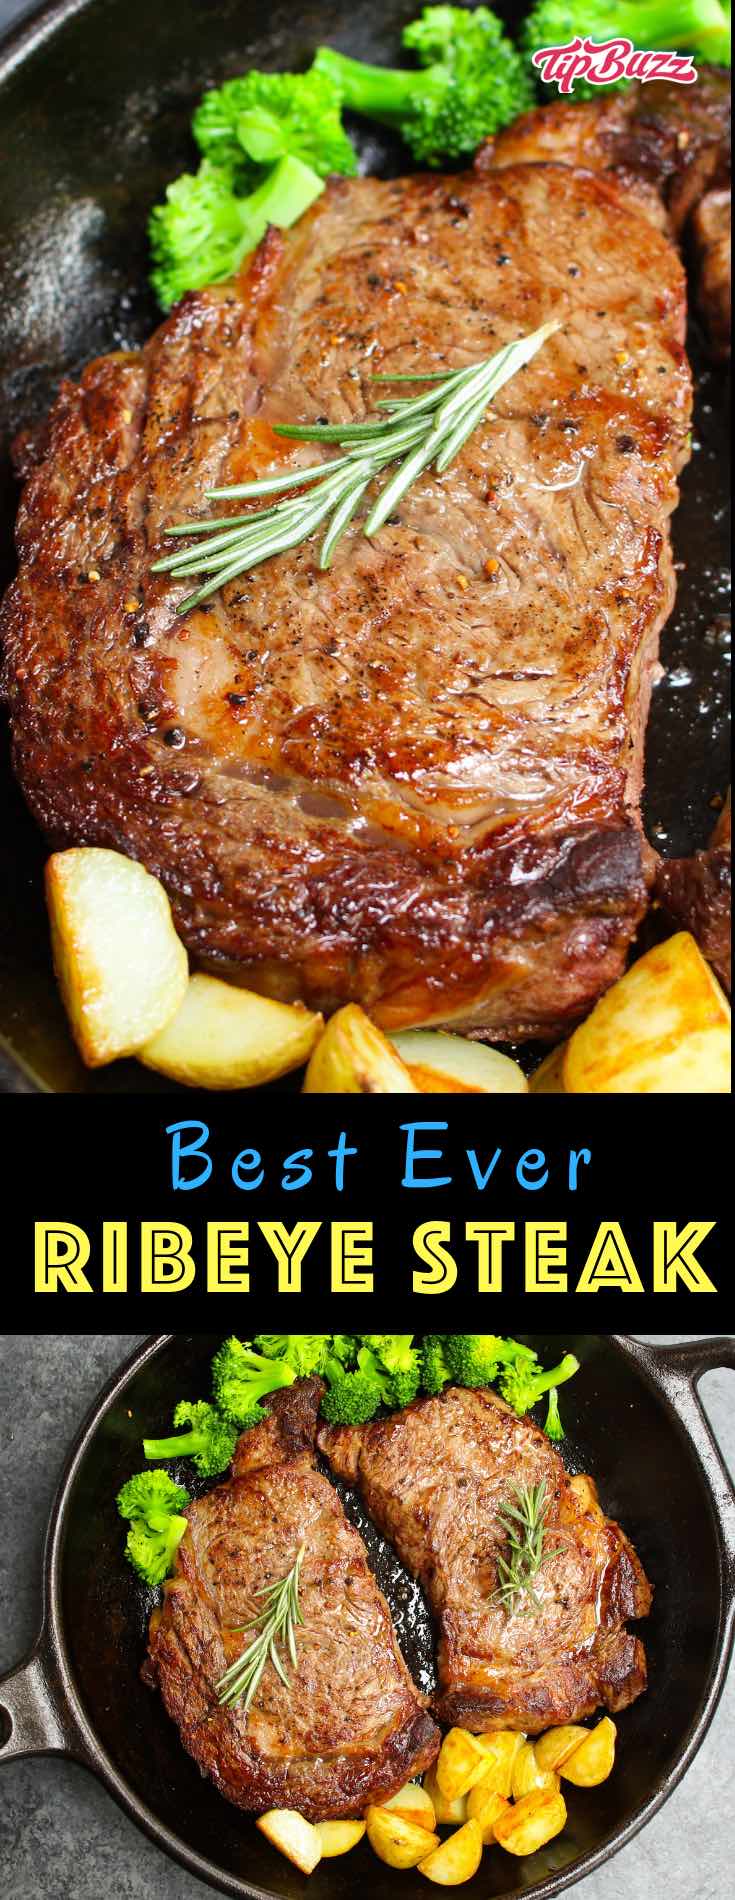 Rib eye steak is a mouthwatering dinner idea when you want to splurge. It's one of the most tender steaks but also the most flavorful! It only takes 20 minutes to make on a stovetop for a memorable dinner that's easy to prepare.